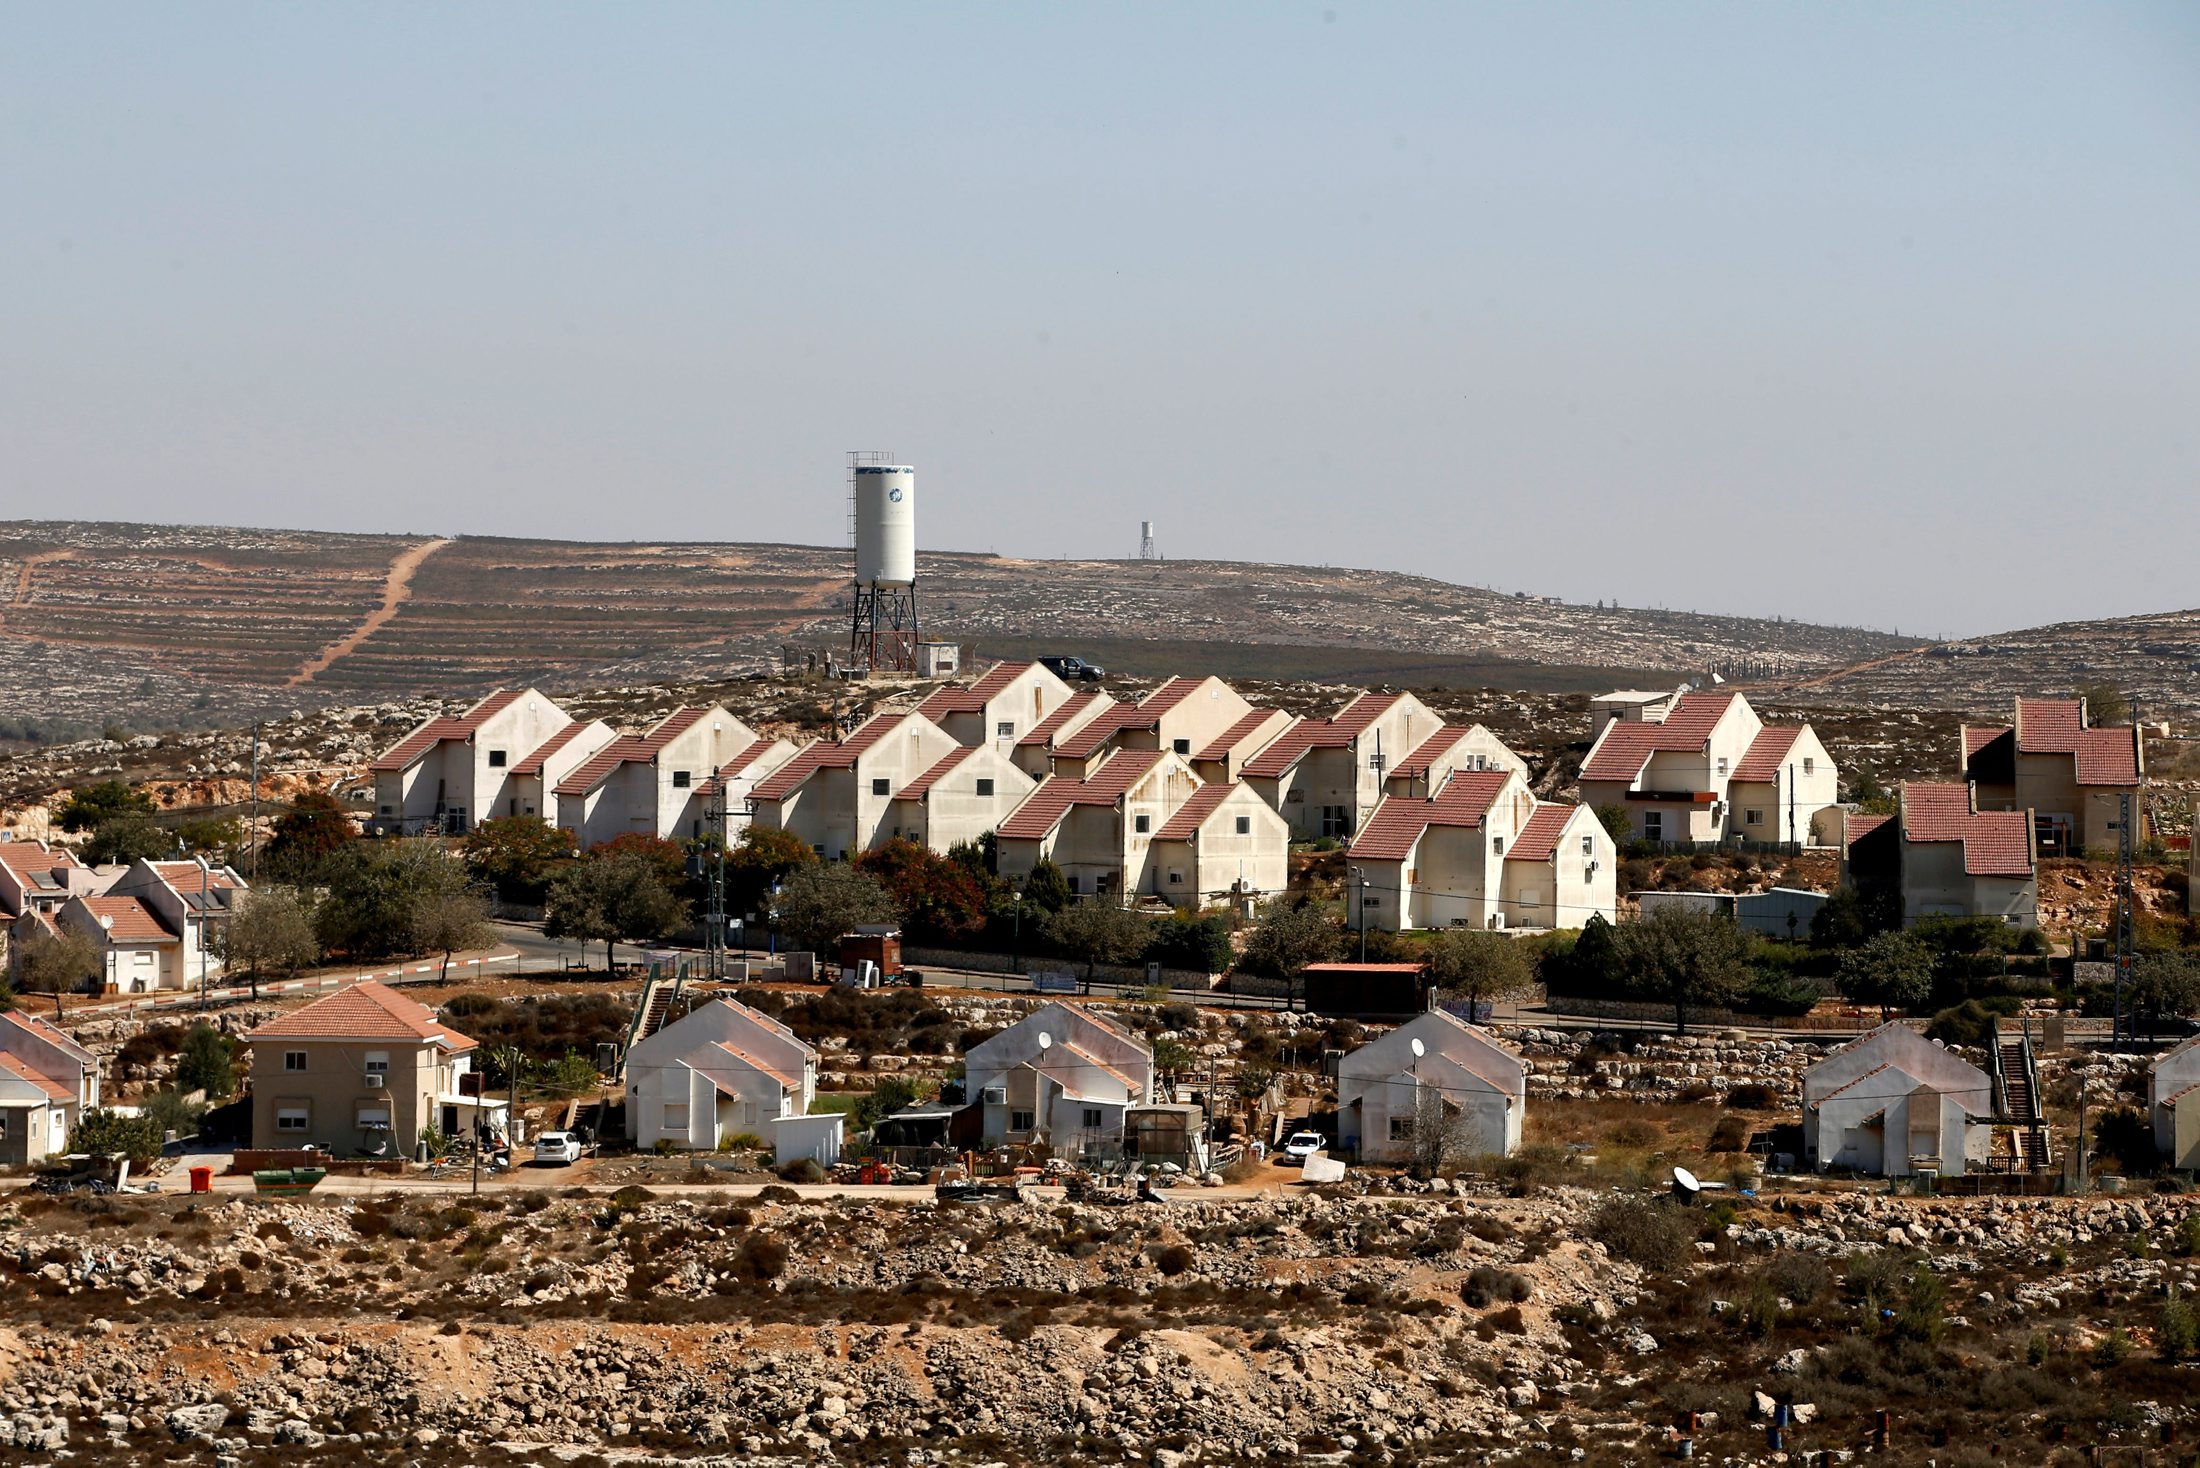 Israeli High Court strikes down law allowing expropriation of private Palestinian lands